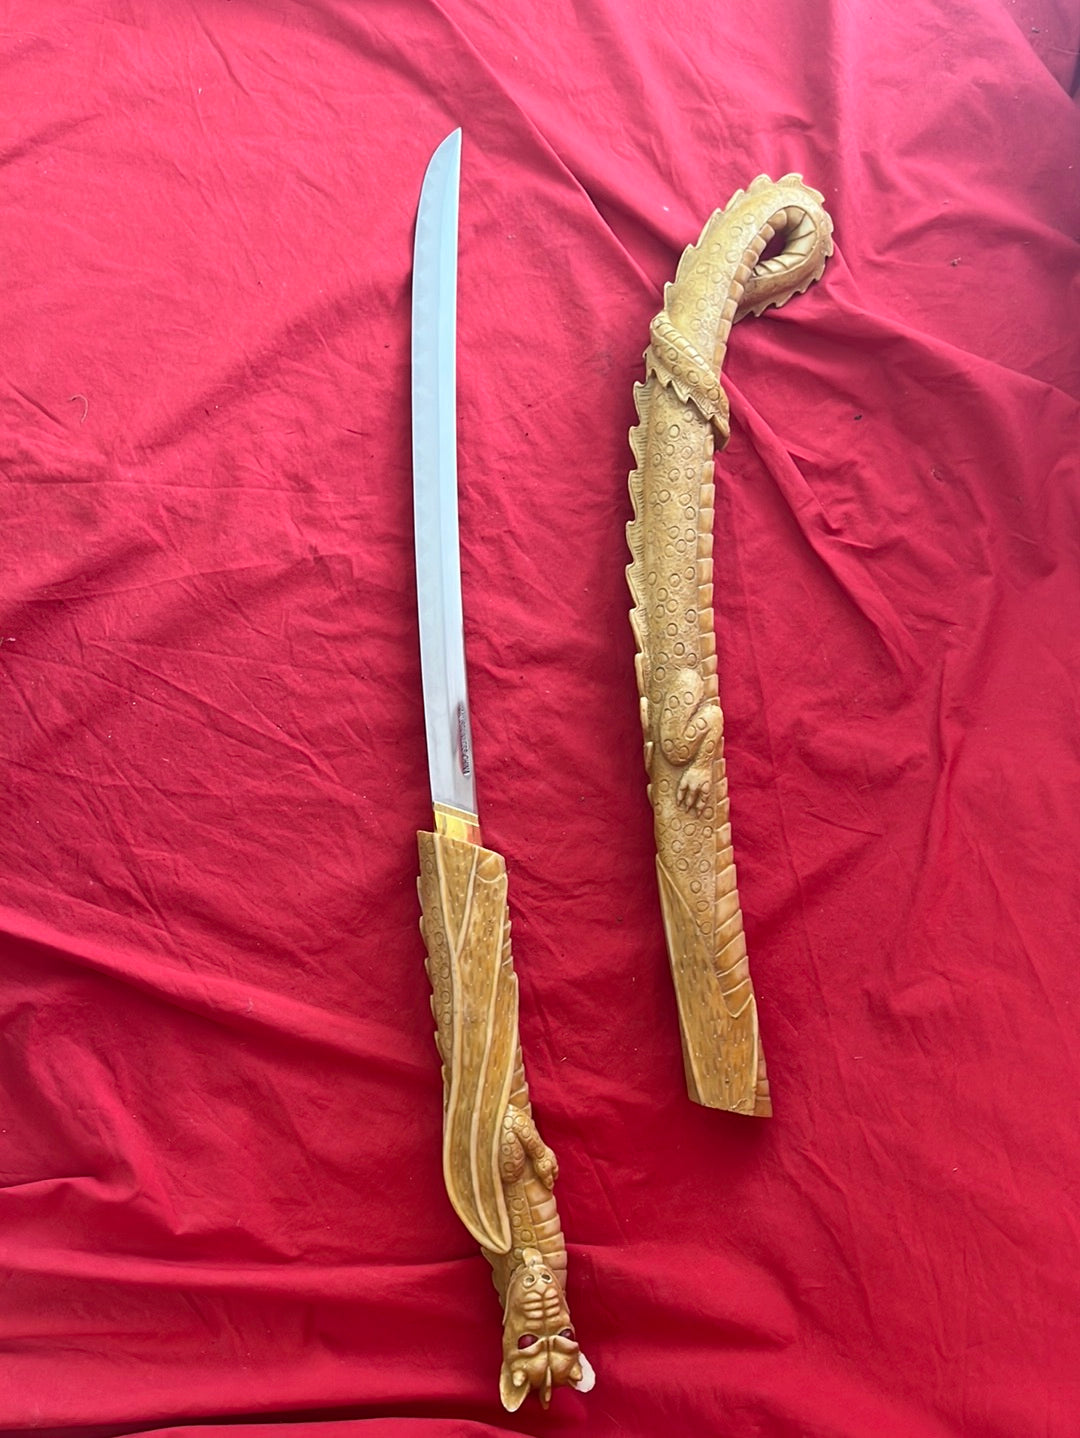 Dragon Sword with Carved Resin Handle and Sheath